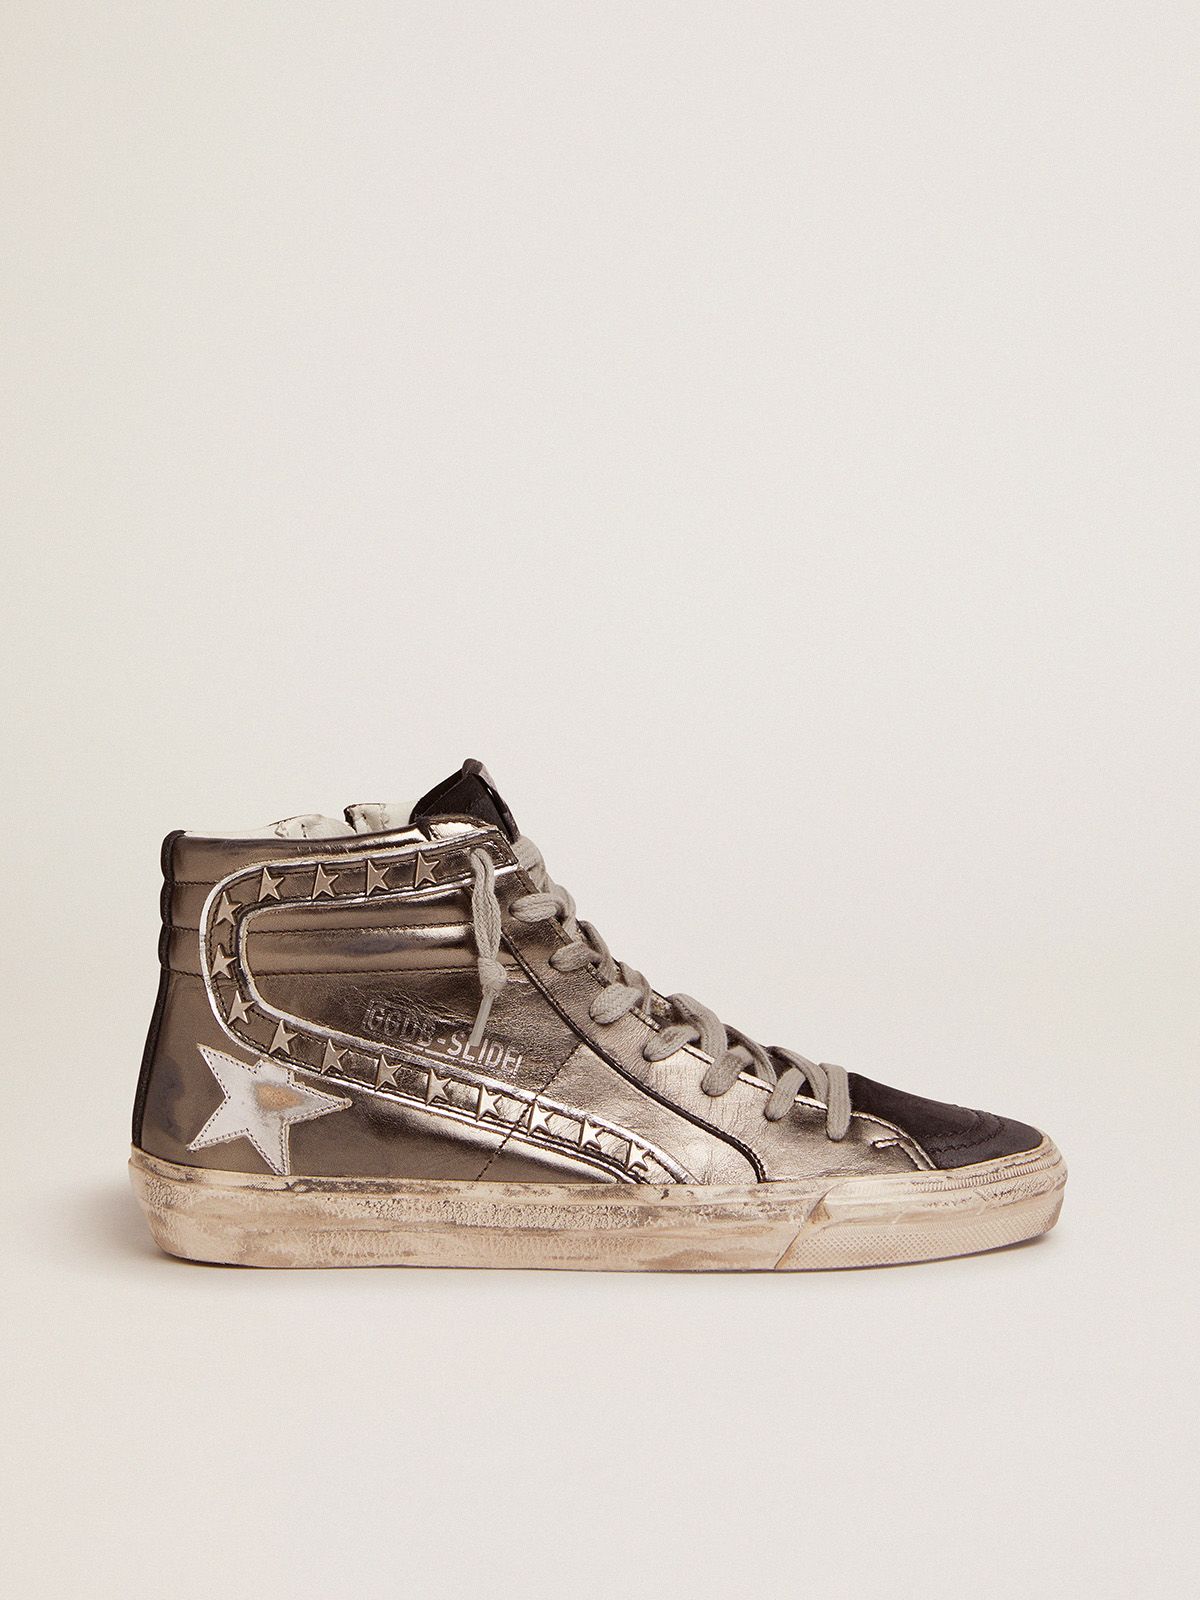 golden goose studs silver Slide upper sneakers laminated with and leather star-shaped